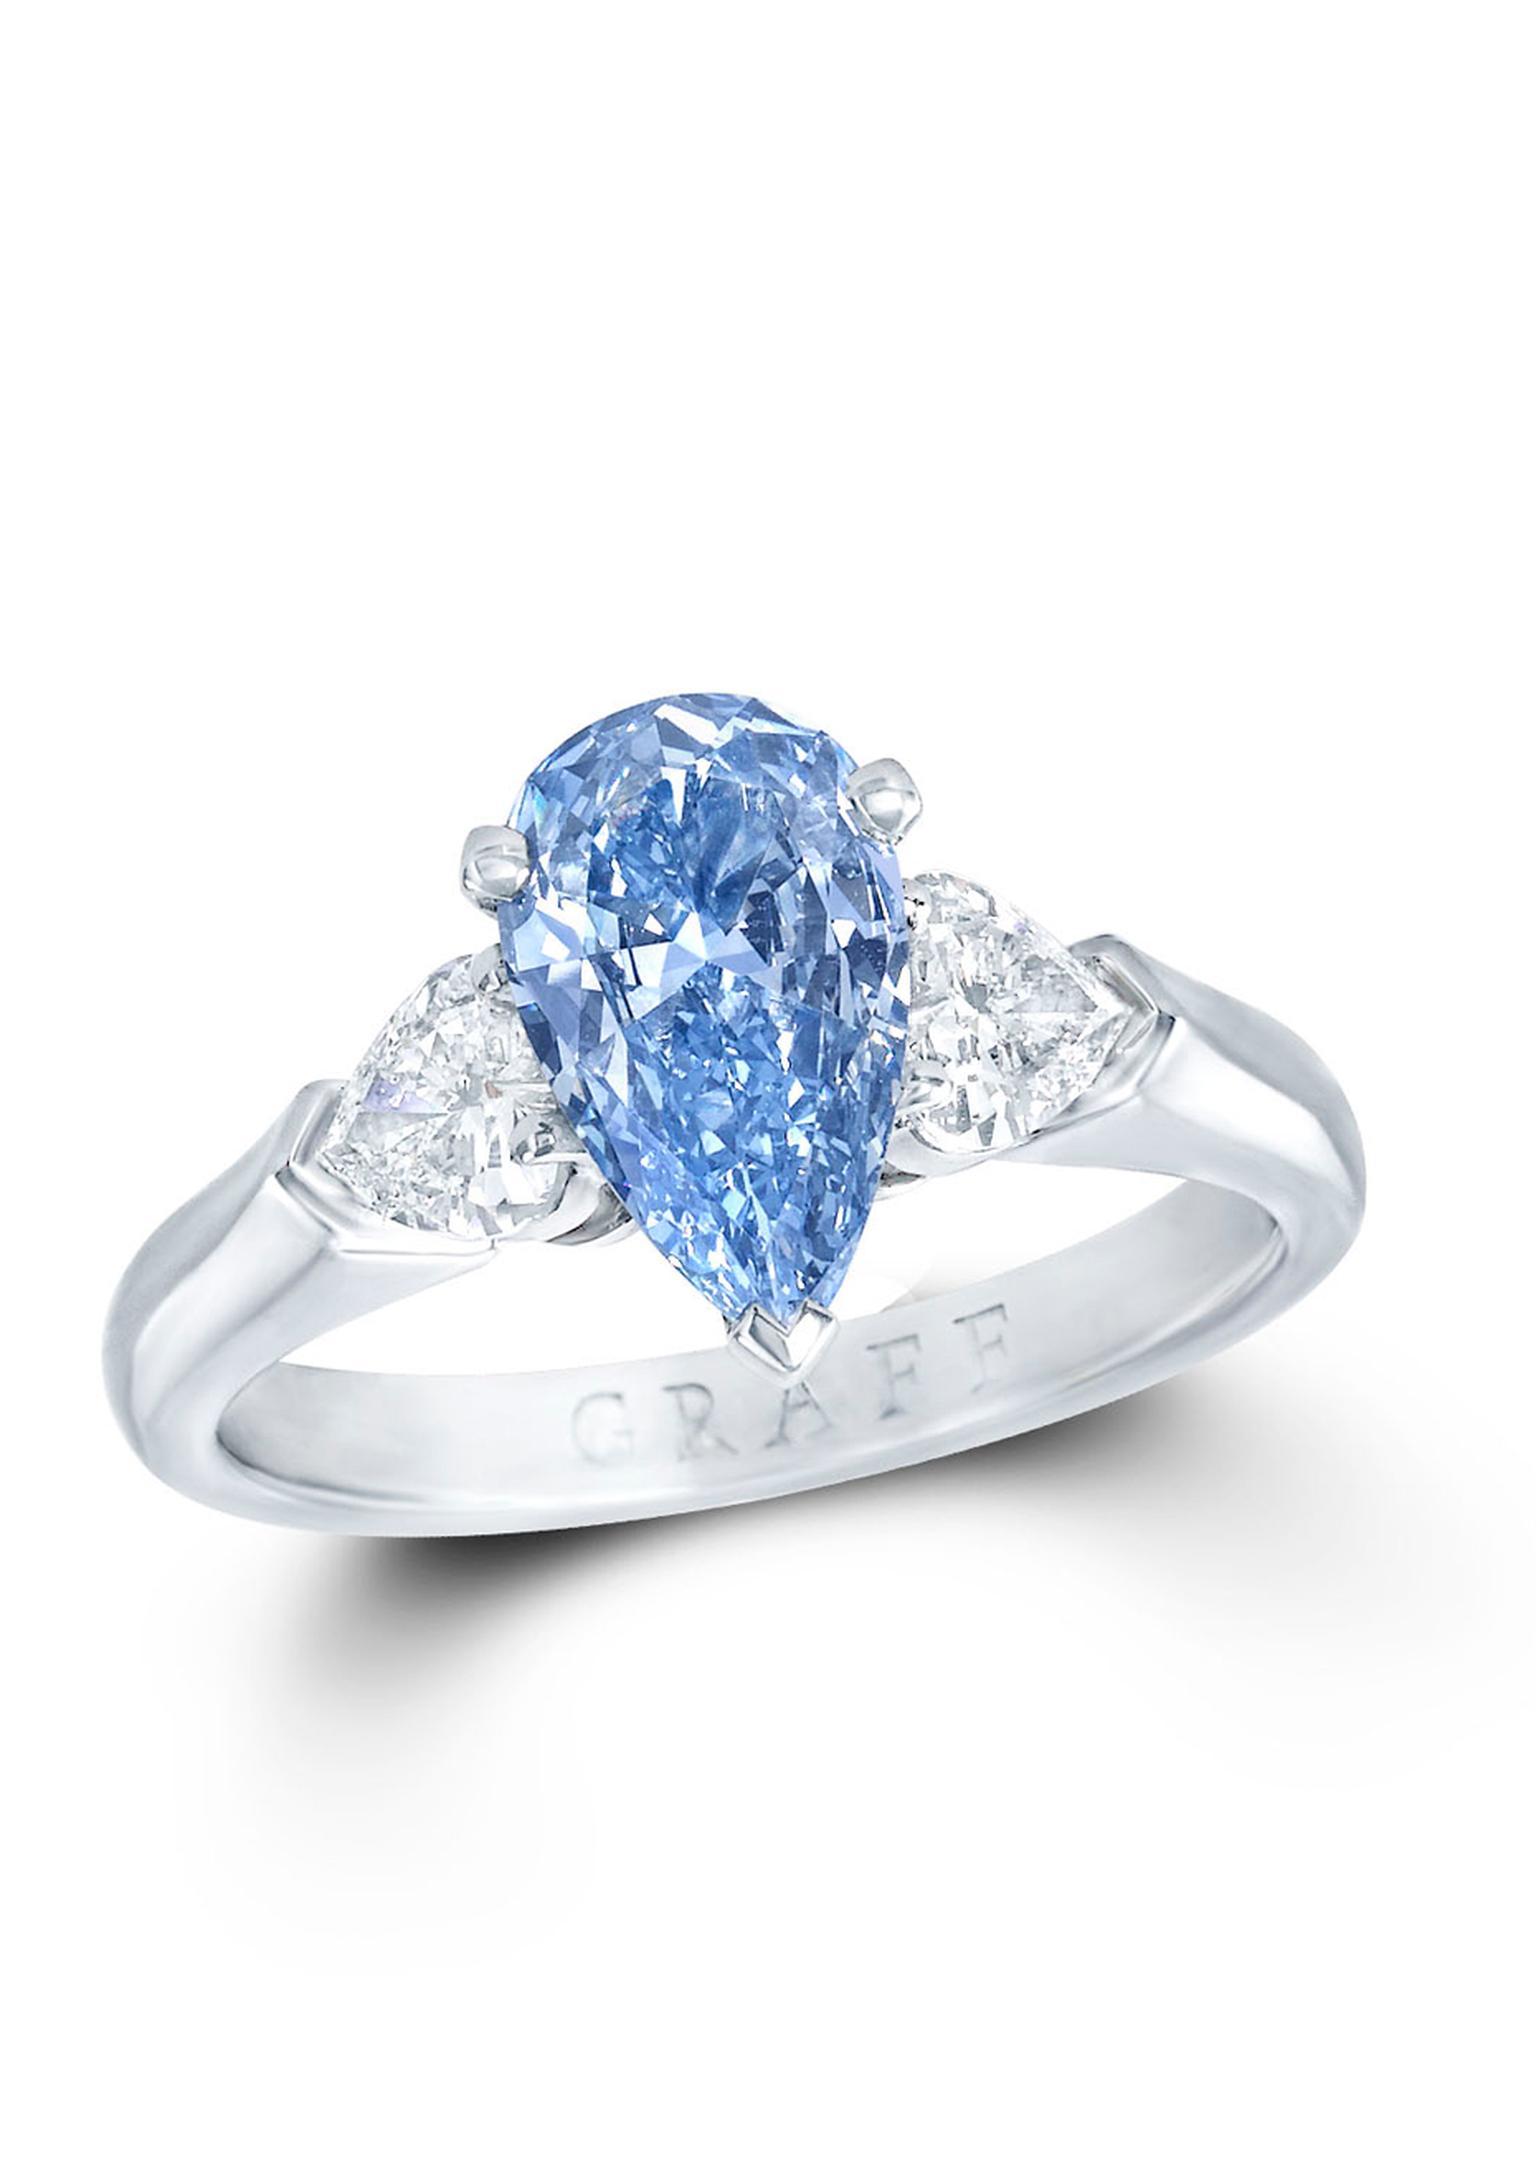 Graff 1.04ct Blue Internally Flawless diamond ring flanked by two pear-shaped white diamonds.